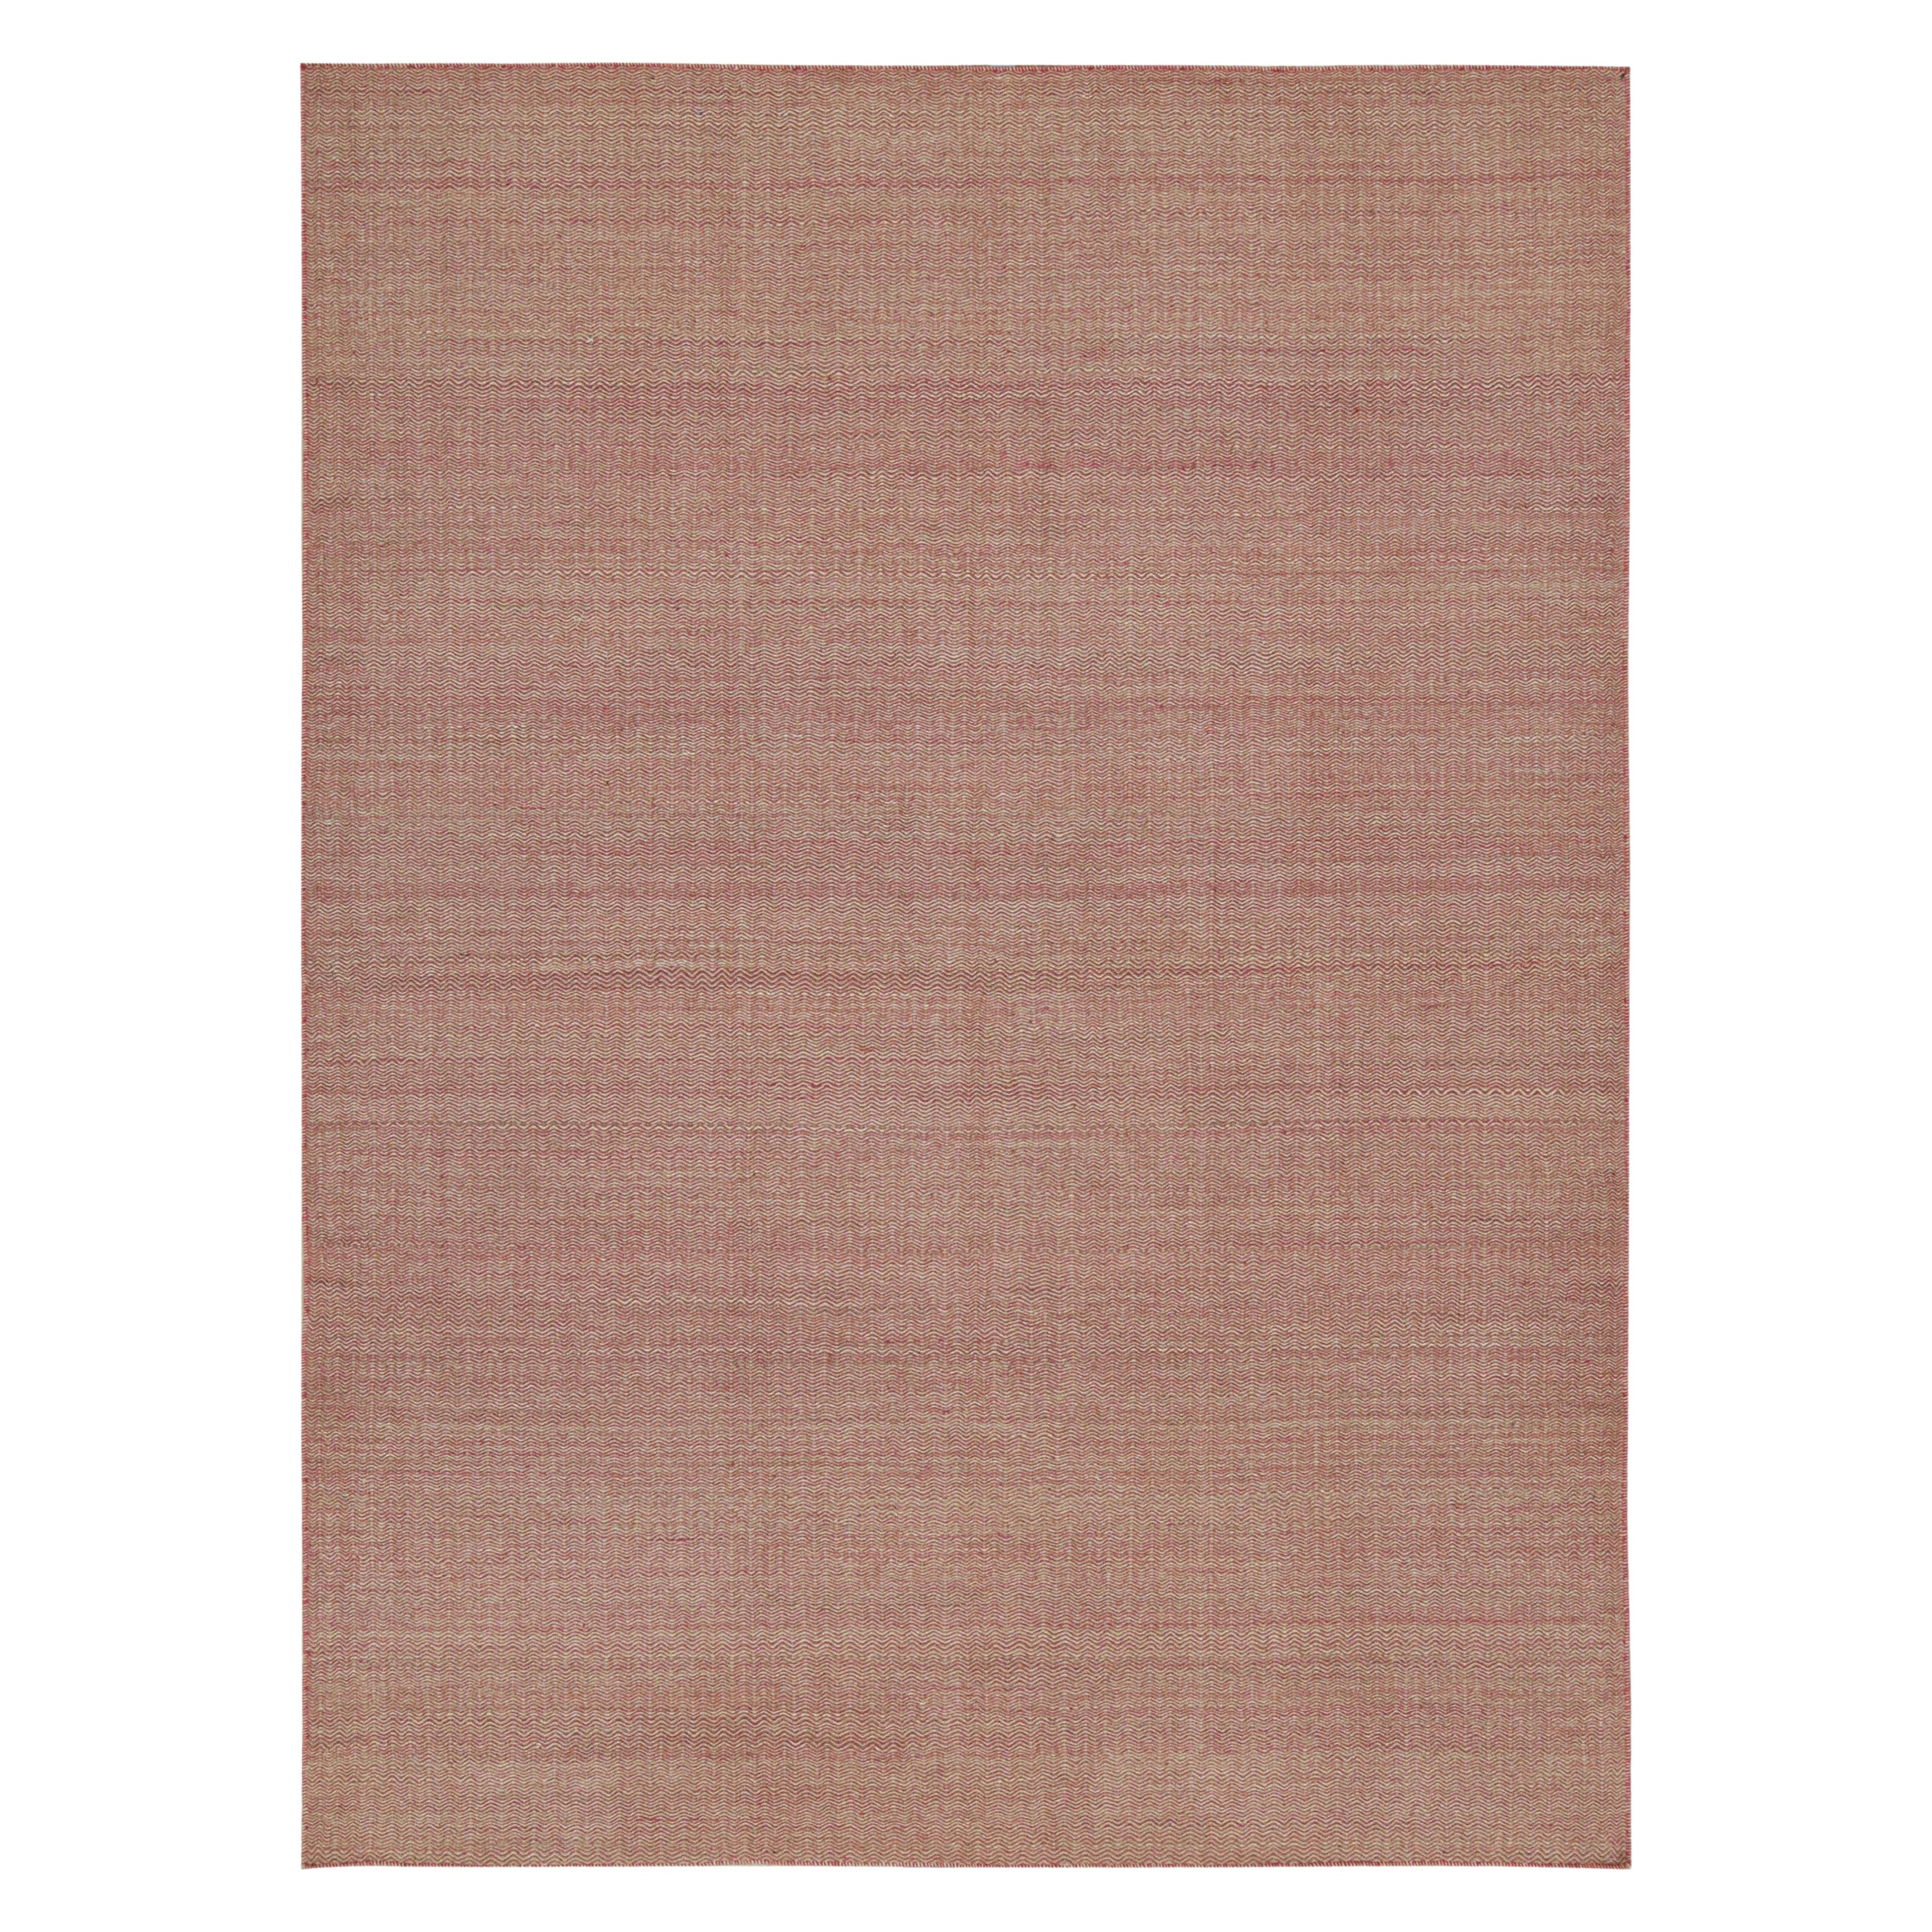 Rug & Kilim’s Contemporary Kilim Rug in Pink and Beige Chevrons